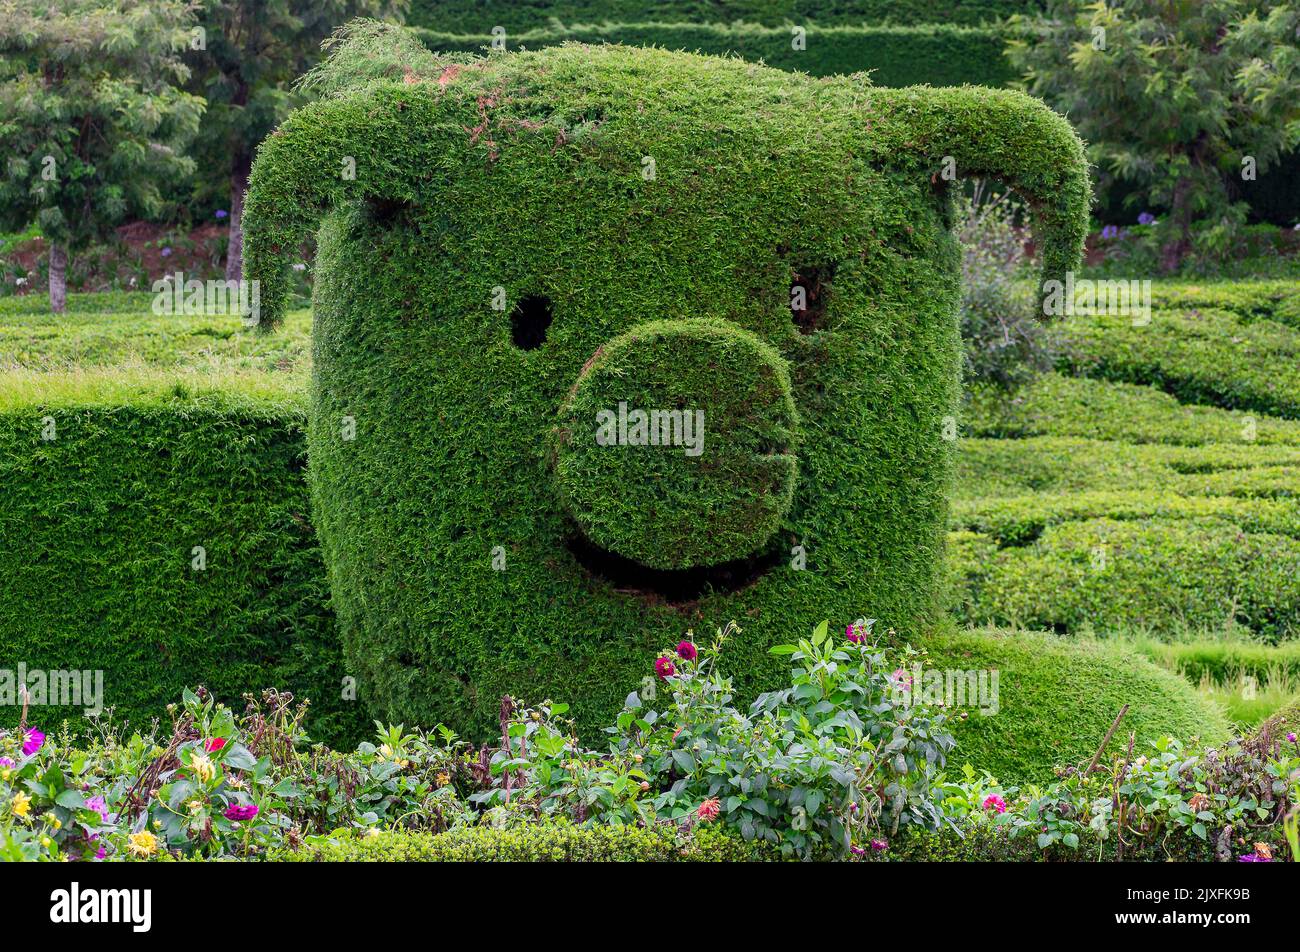 cartoon pig face shaped created from bushes Stock Photo